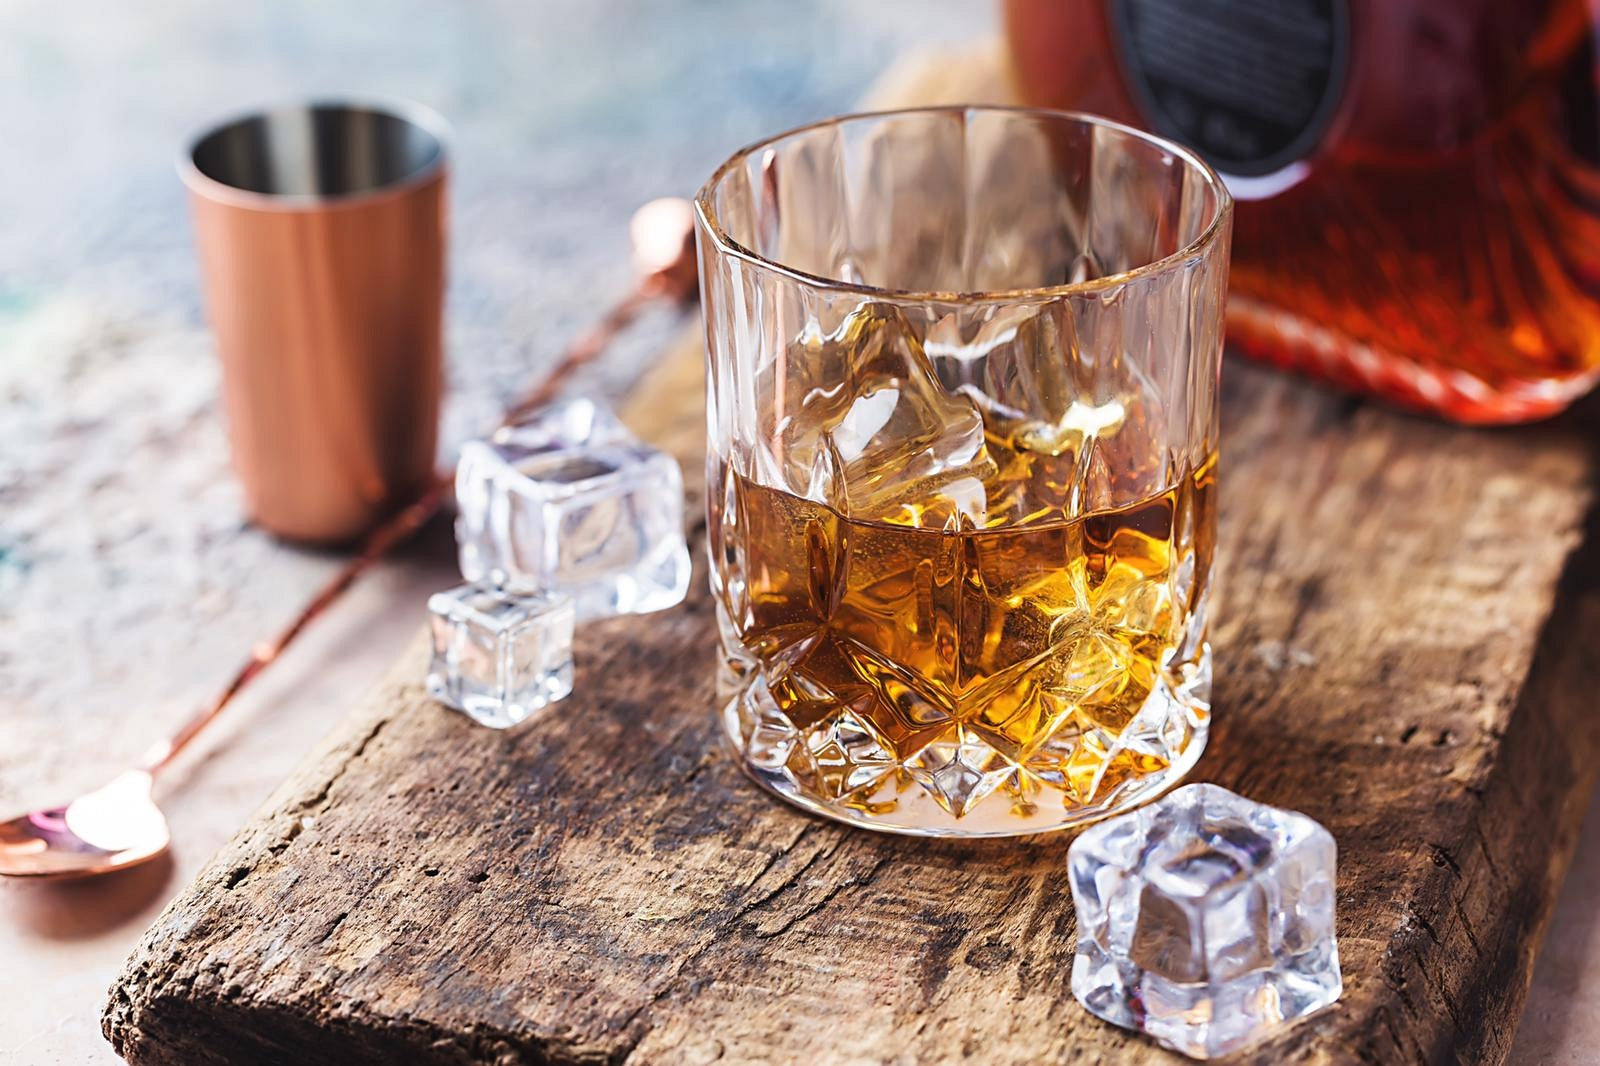 The Regal Top 10 Guide To ‘YOUR’ Whisky